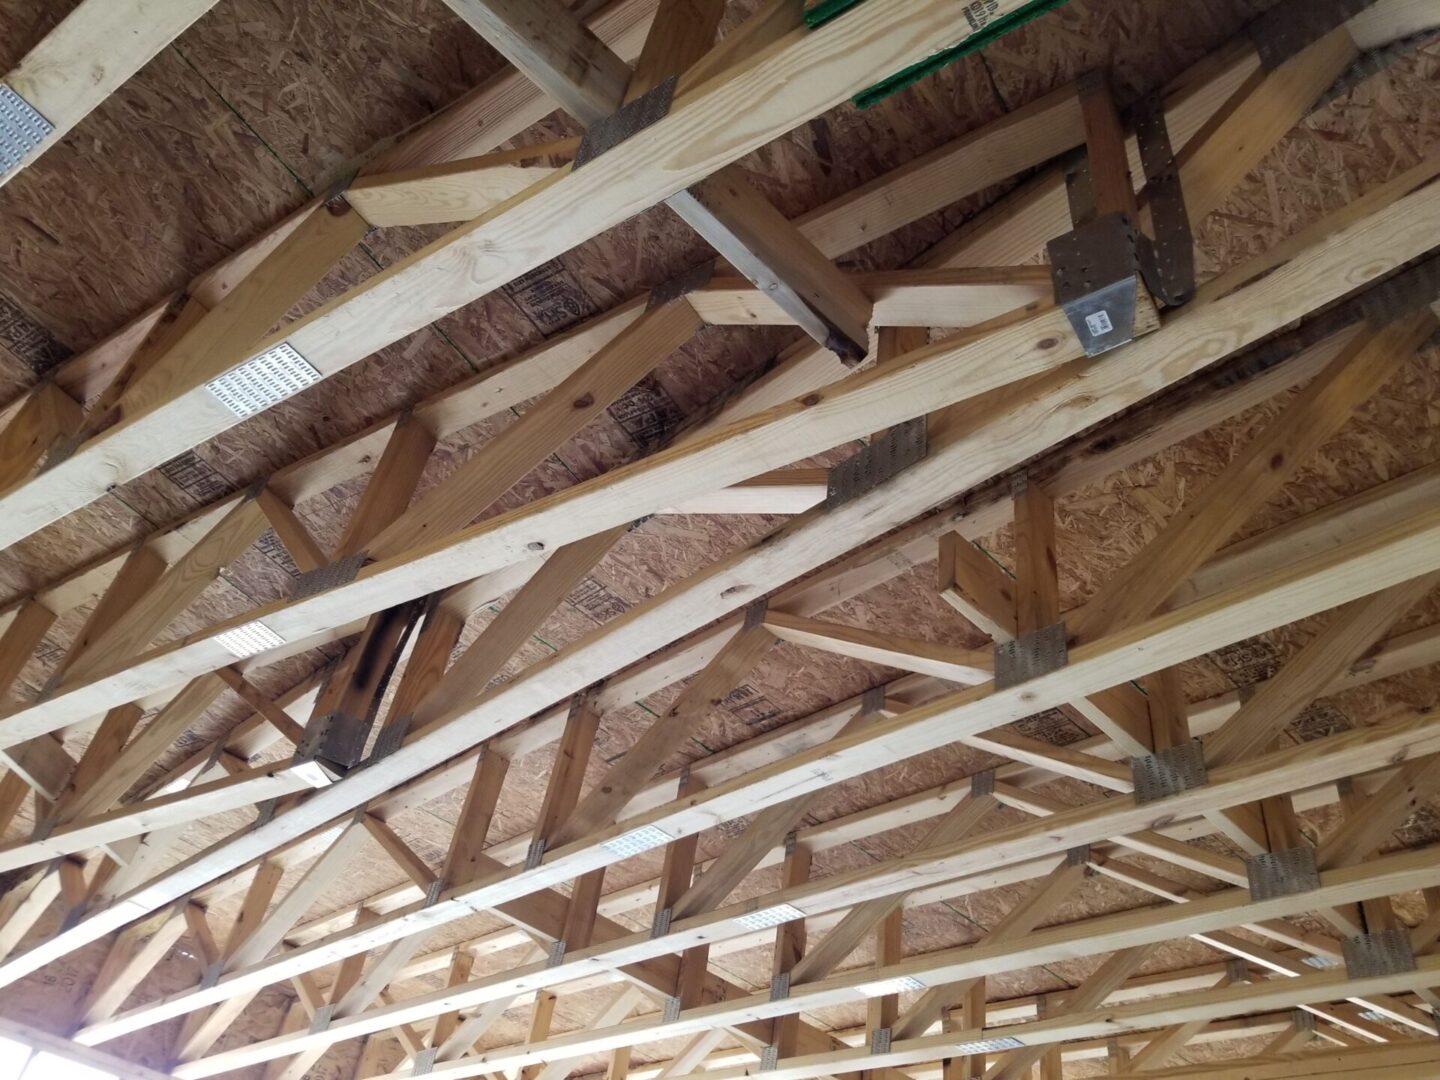 A wooden material used for roofing